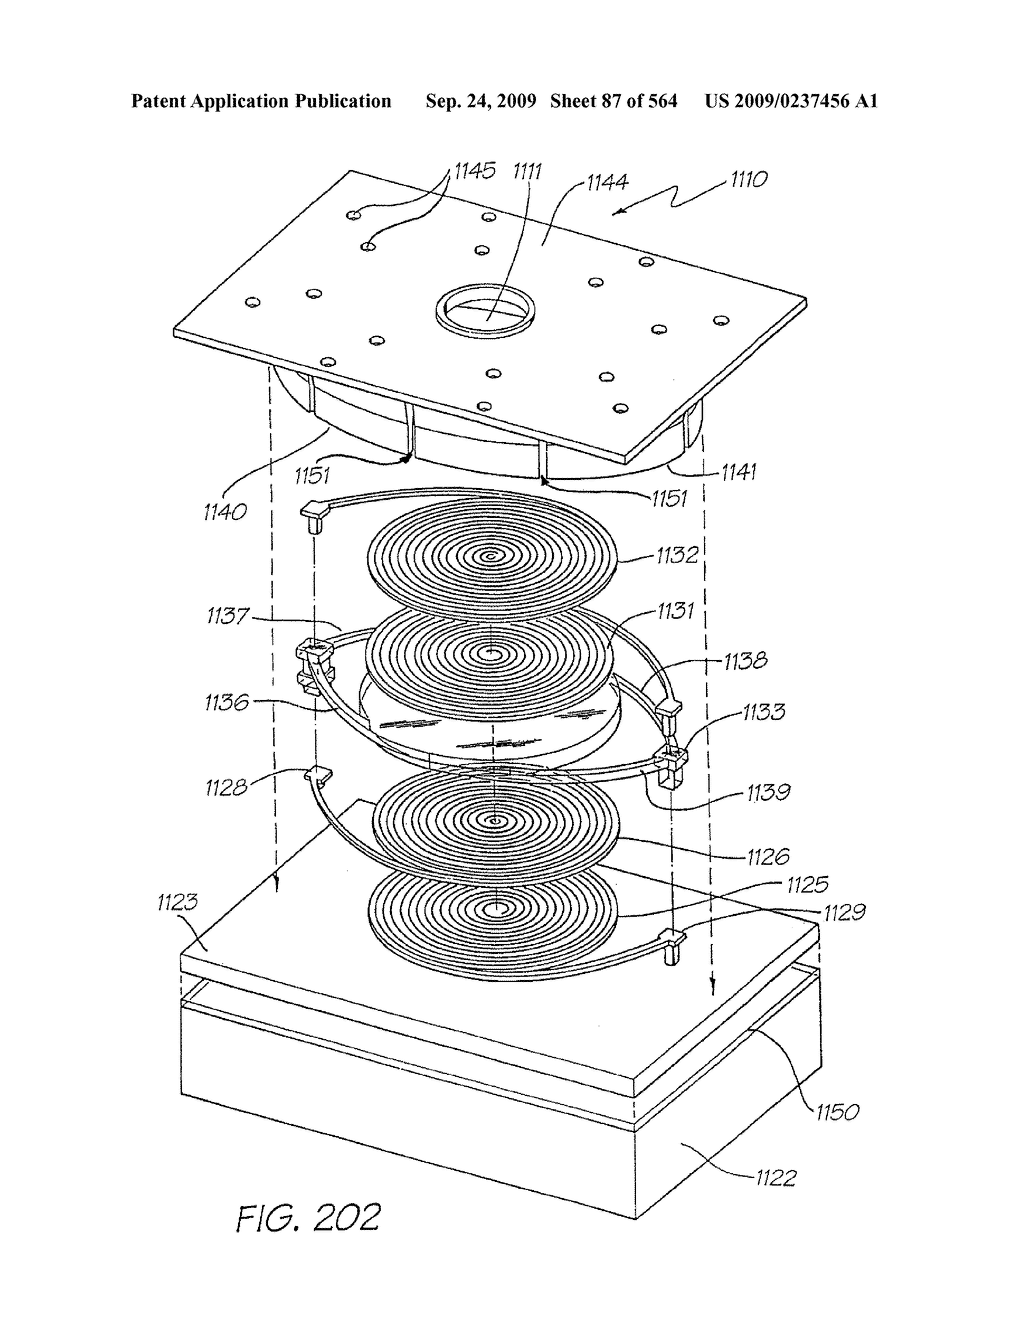 Inkjet Printhead With Paddle For Ejecting Ink From One Of Two Nozzles - diagram, schematic, and image 88